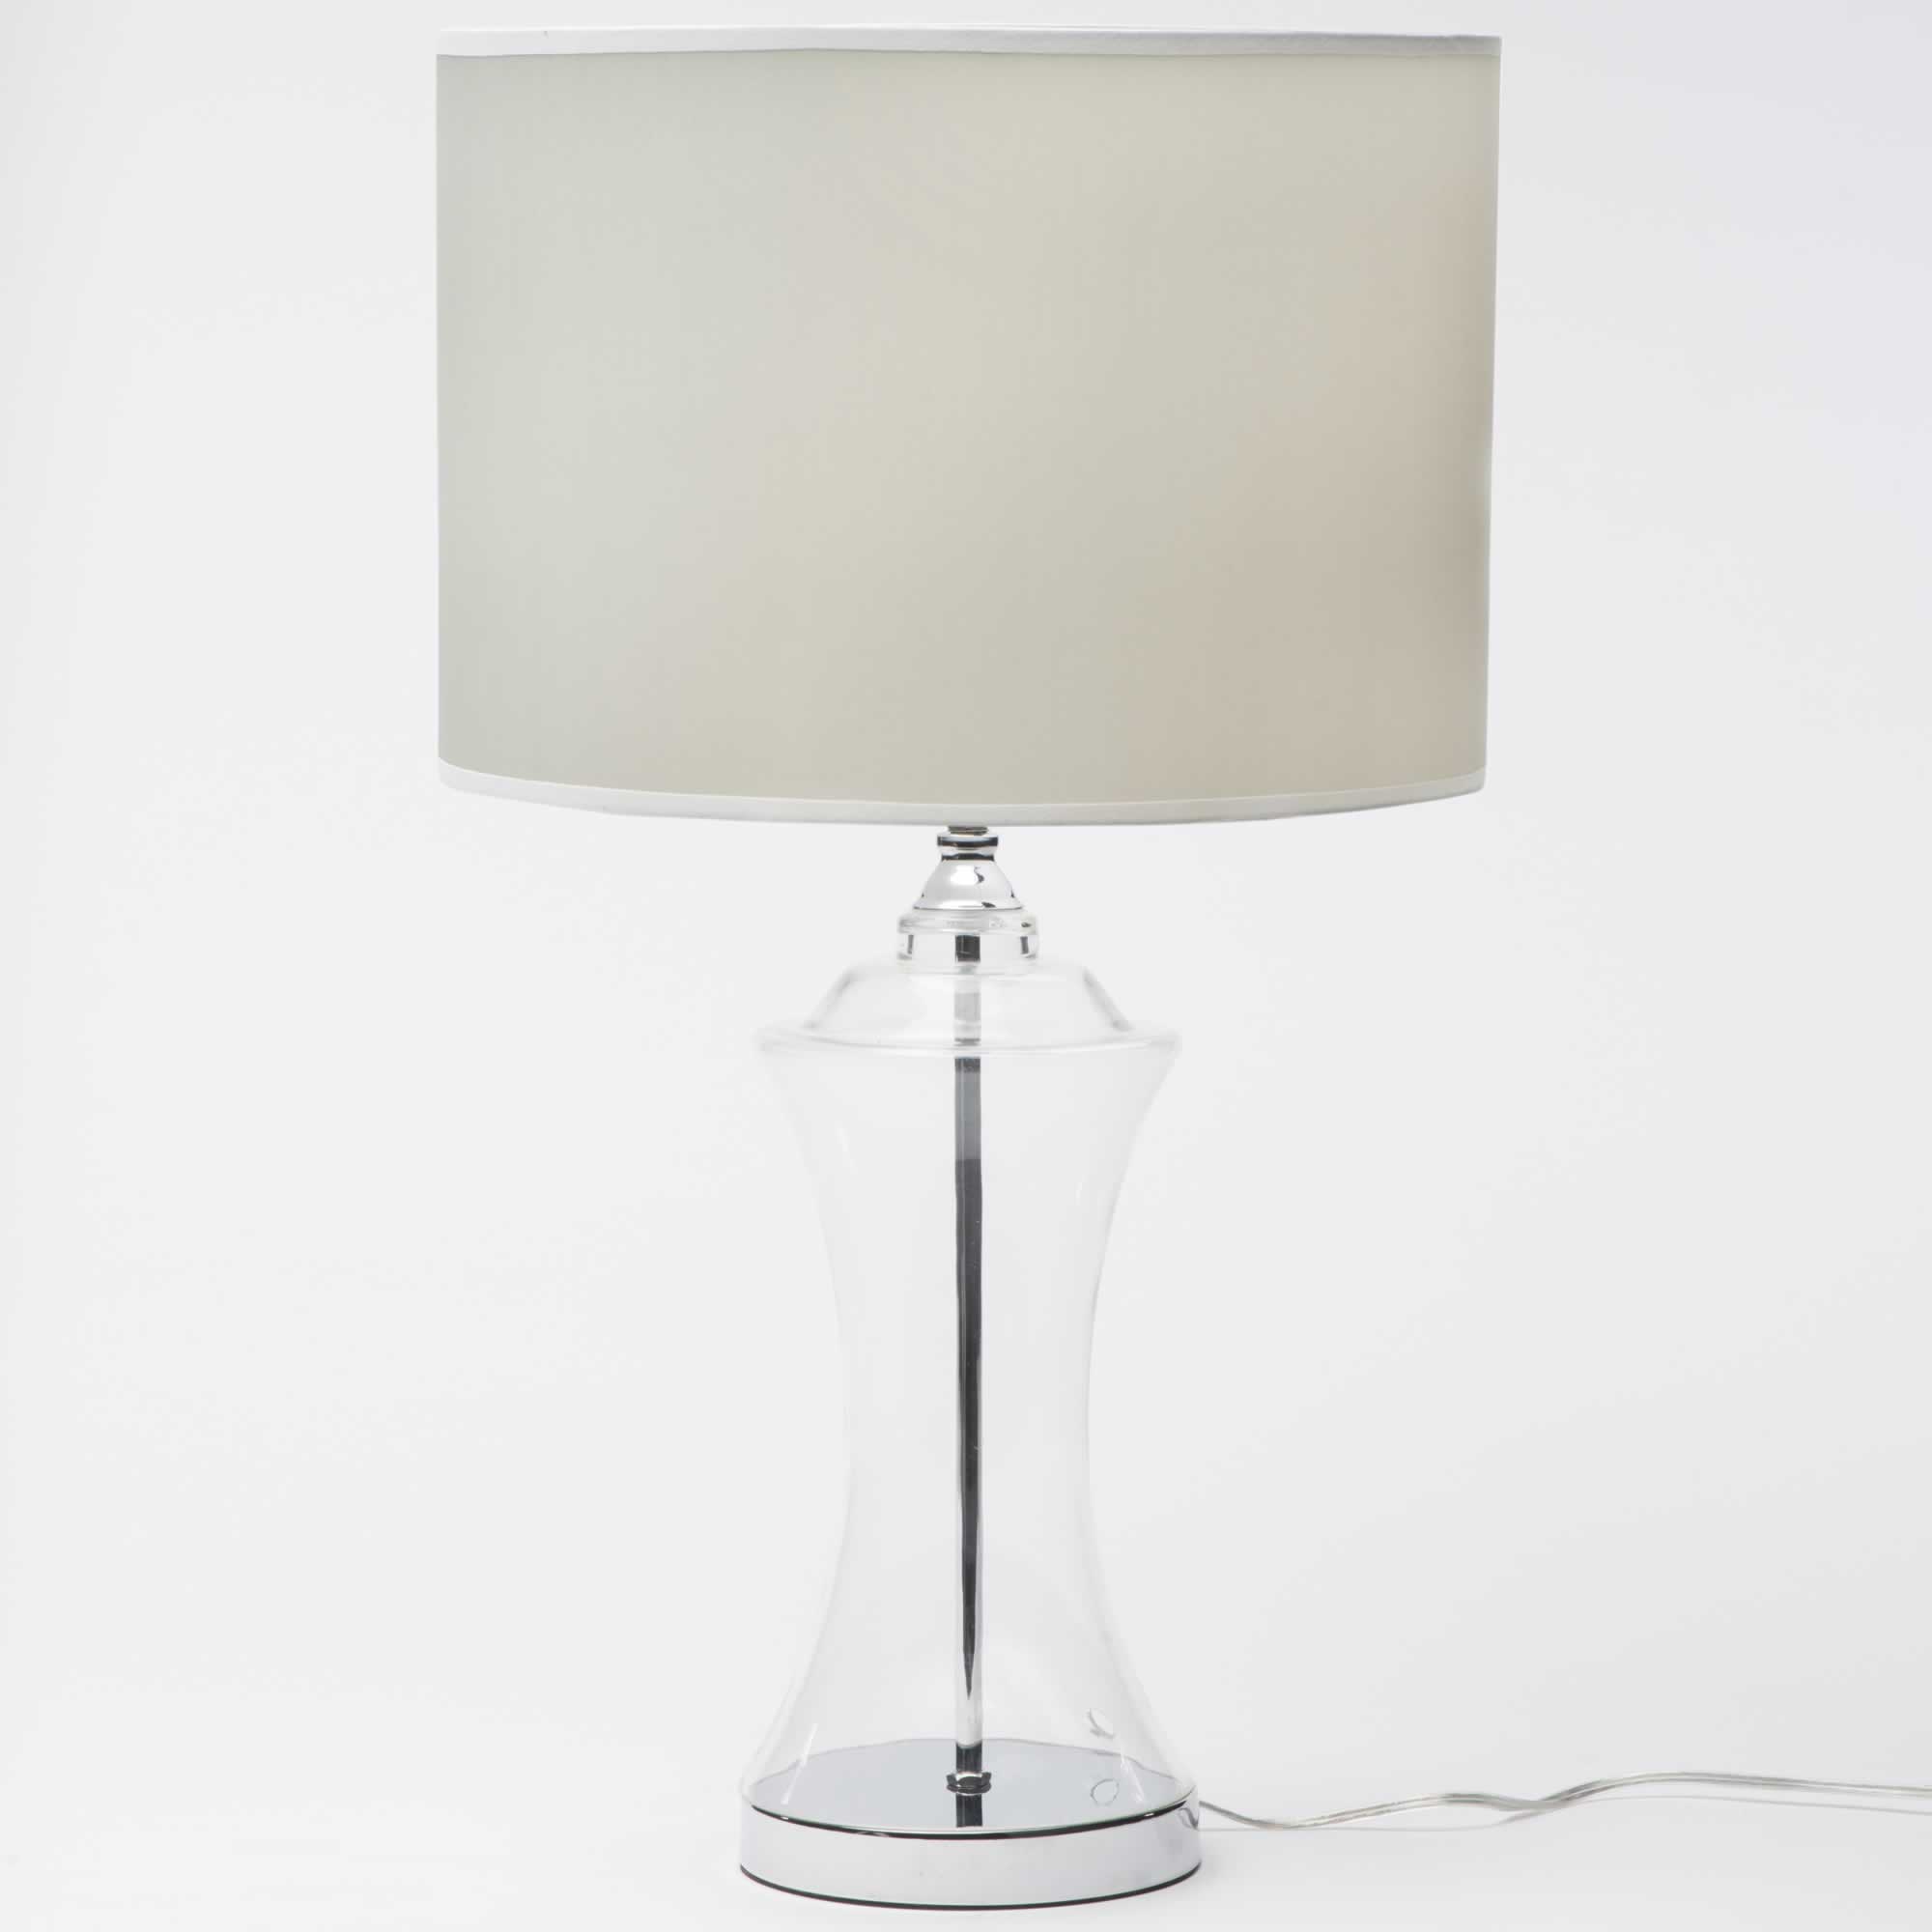 The Elegant Hourglass Table Lamp - TL0008